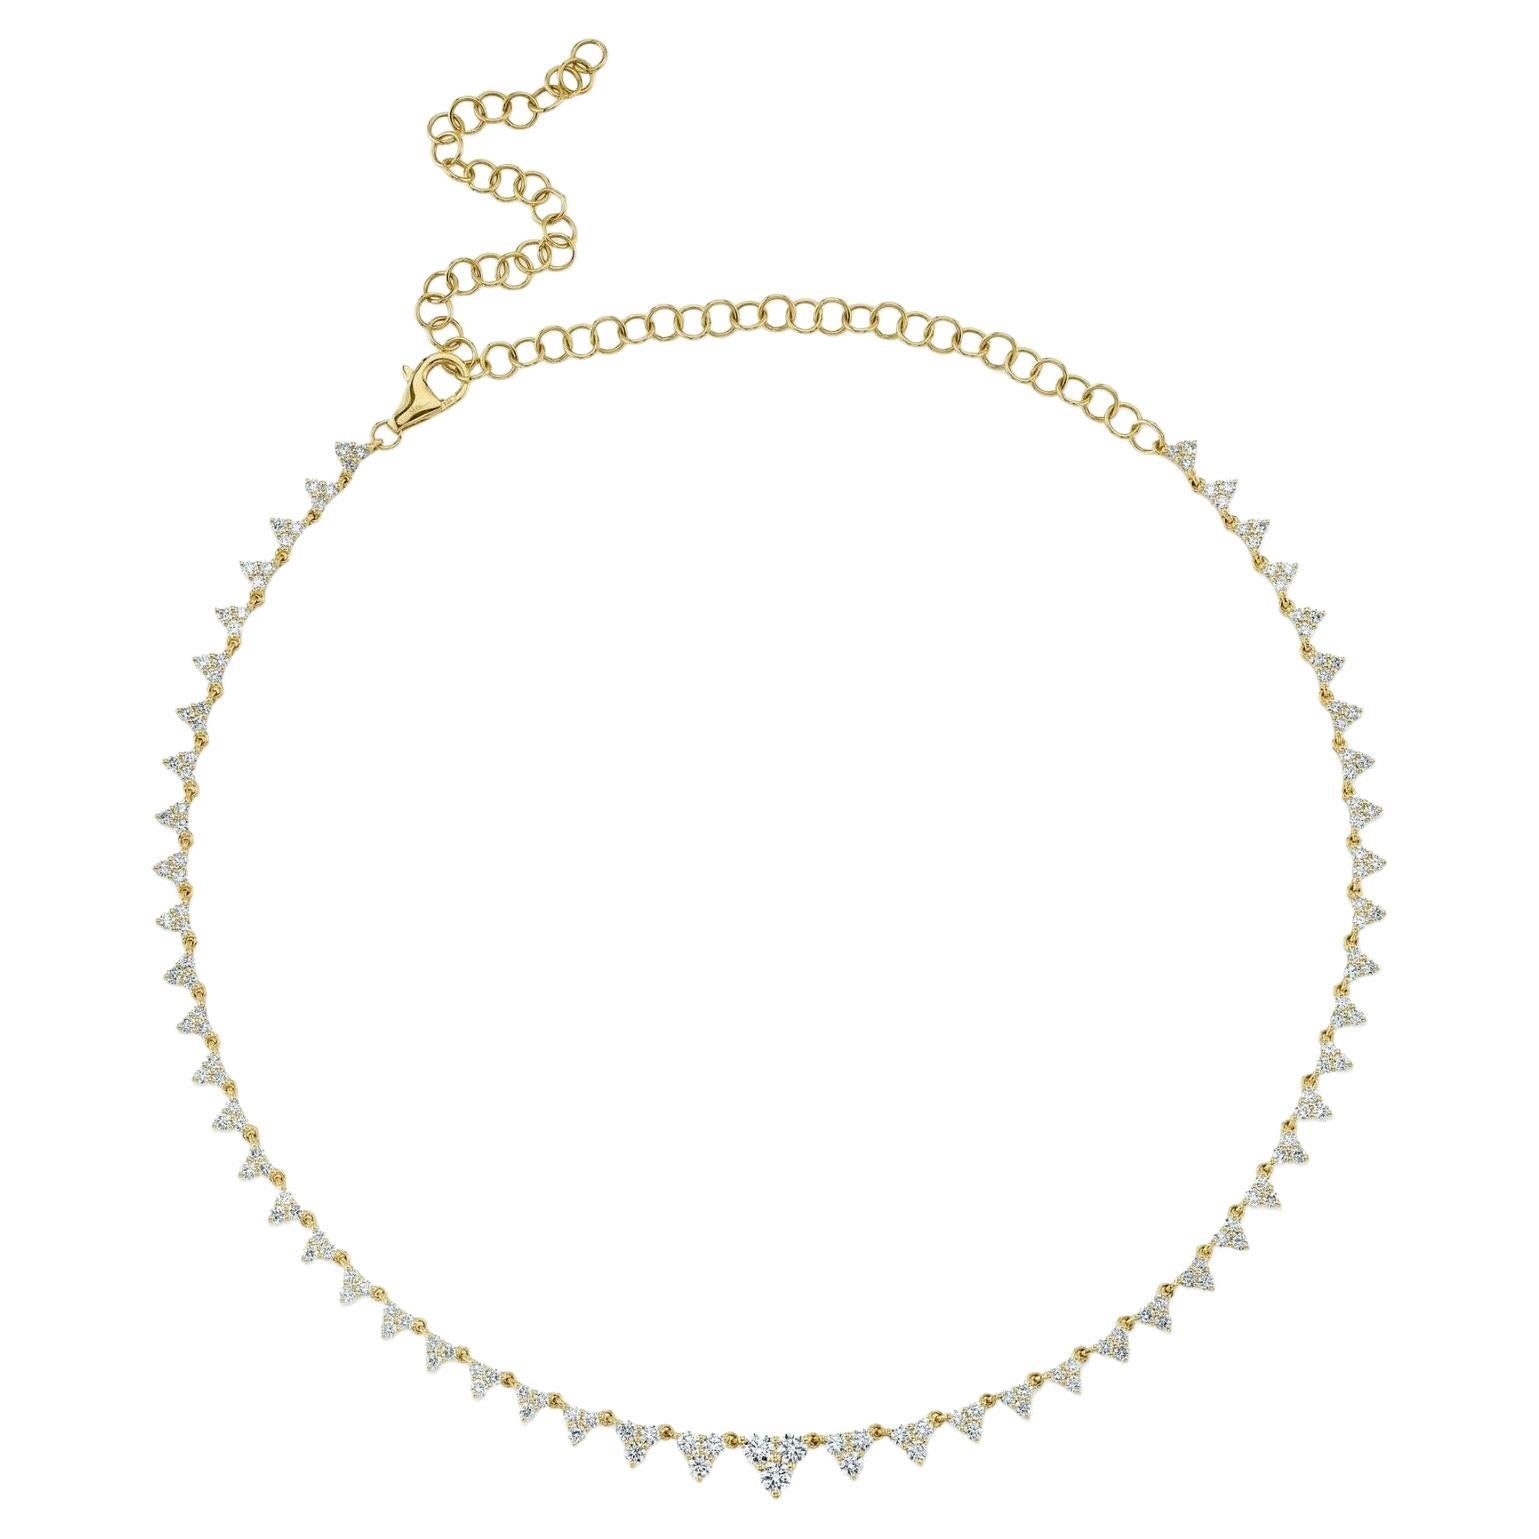 Triangle 4.08 Carat Diamond Yellow Gold Tennis Necklace Oval Link Chain For Sale